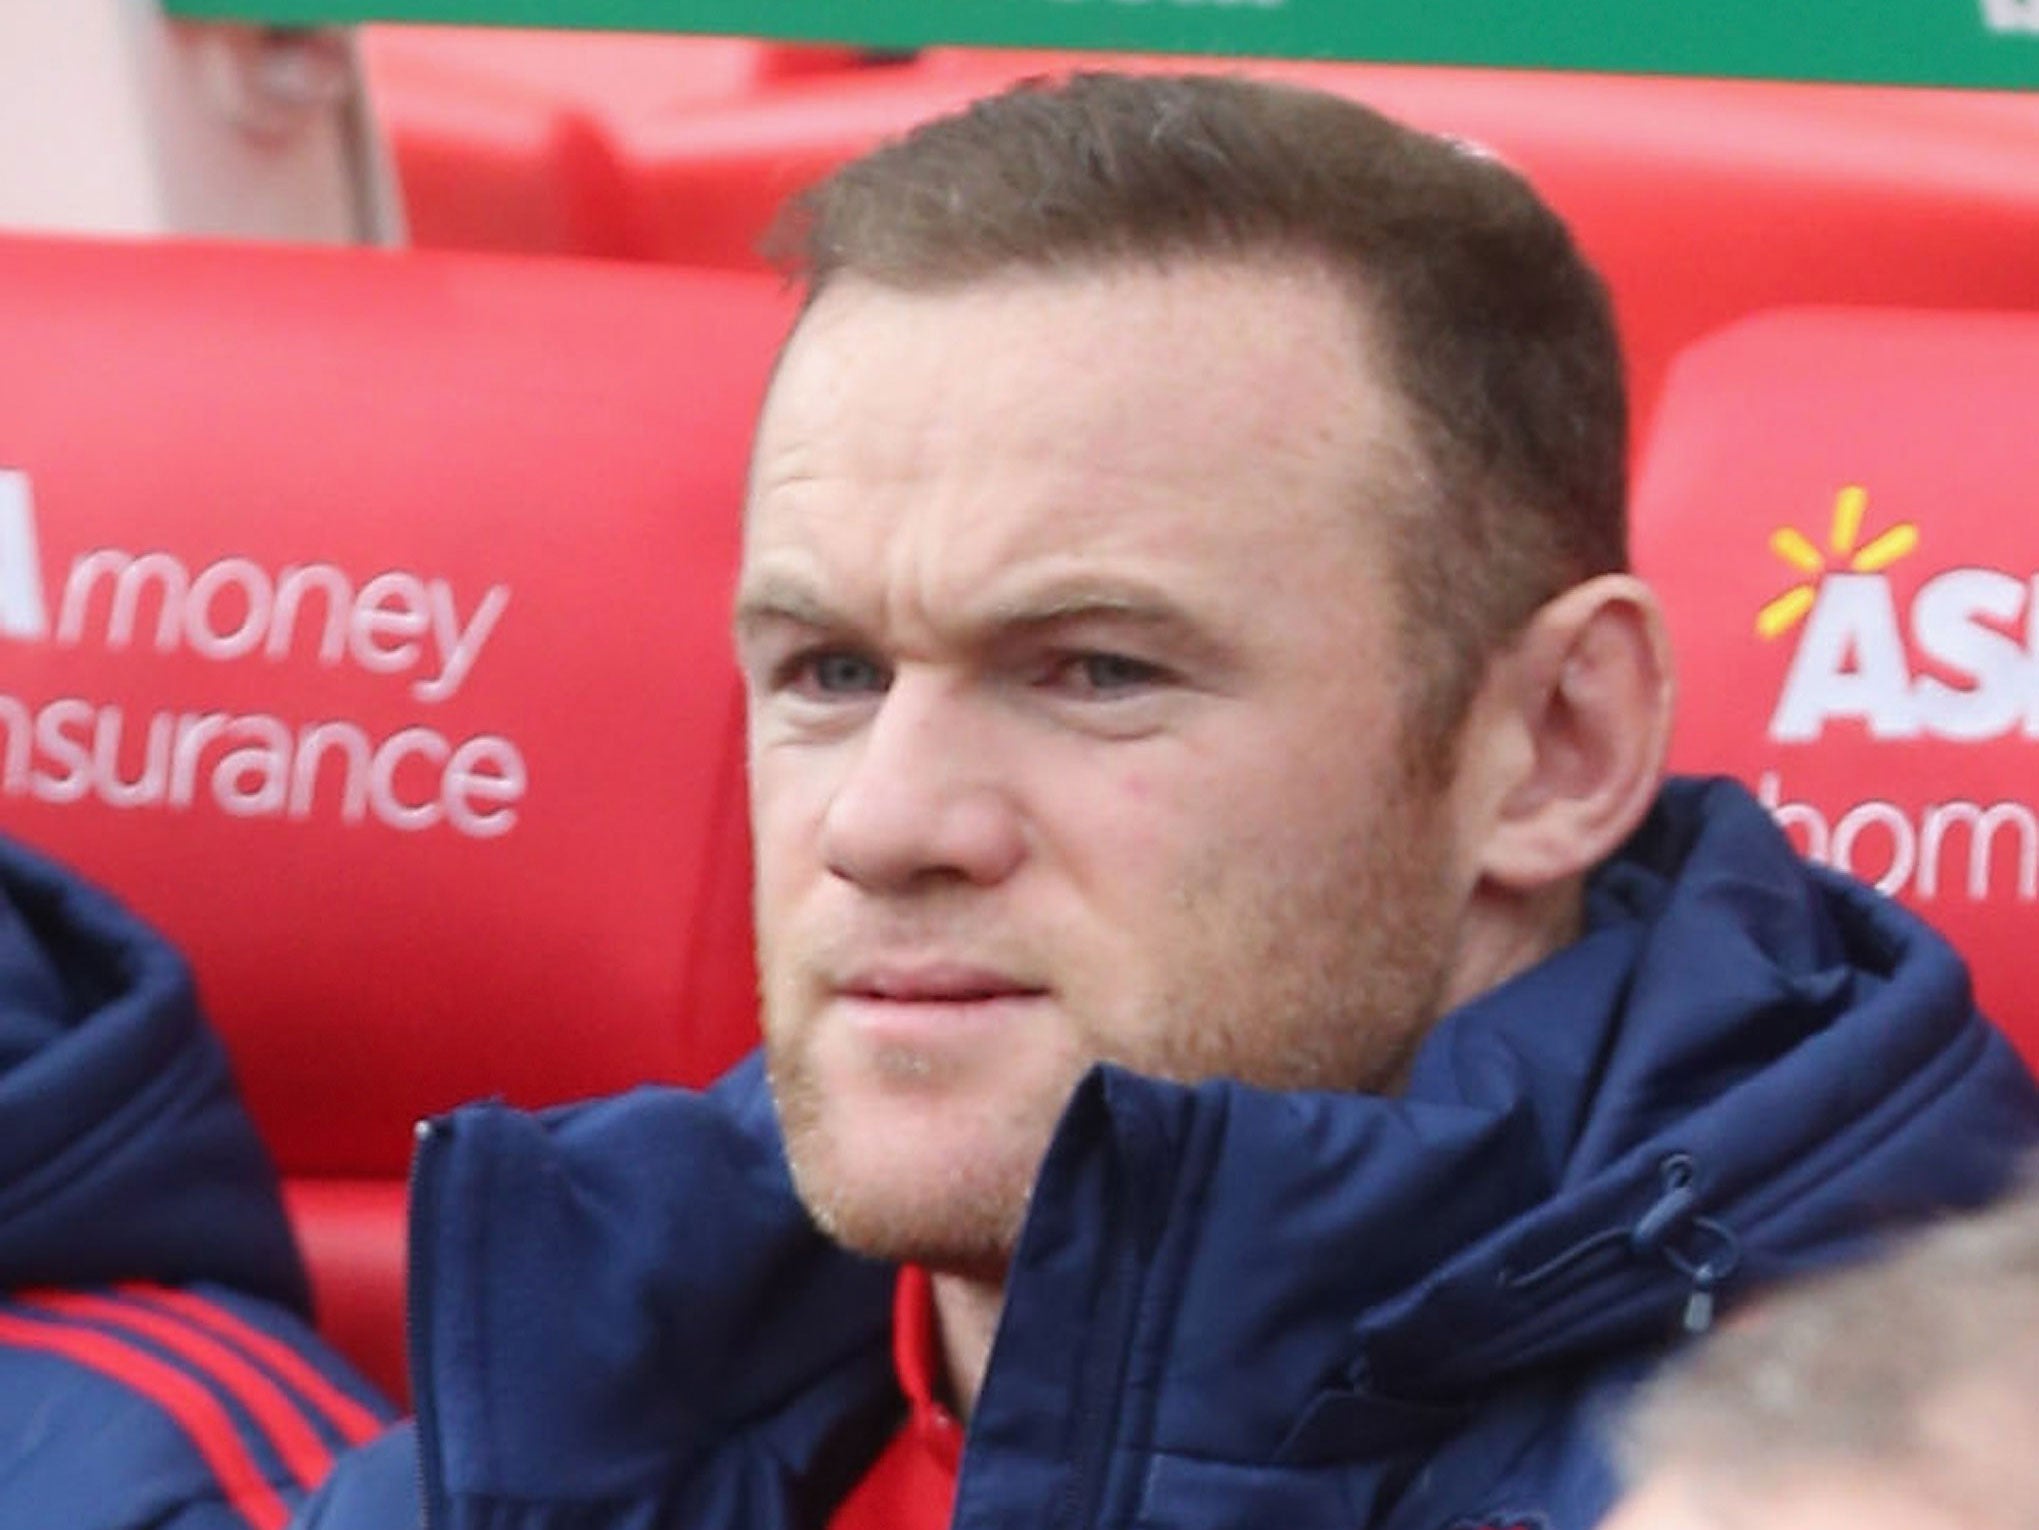 Manchester United striker and captain Wayne Rooney